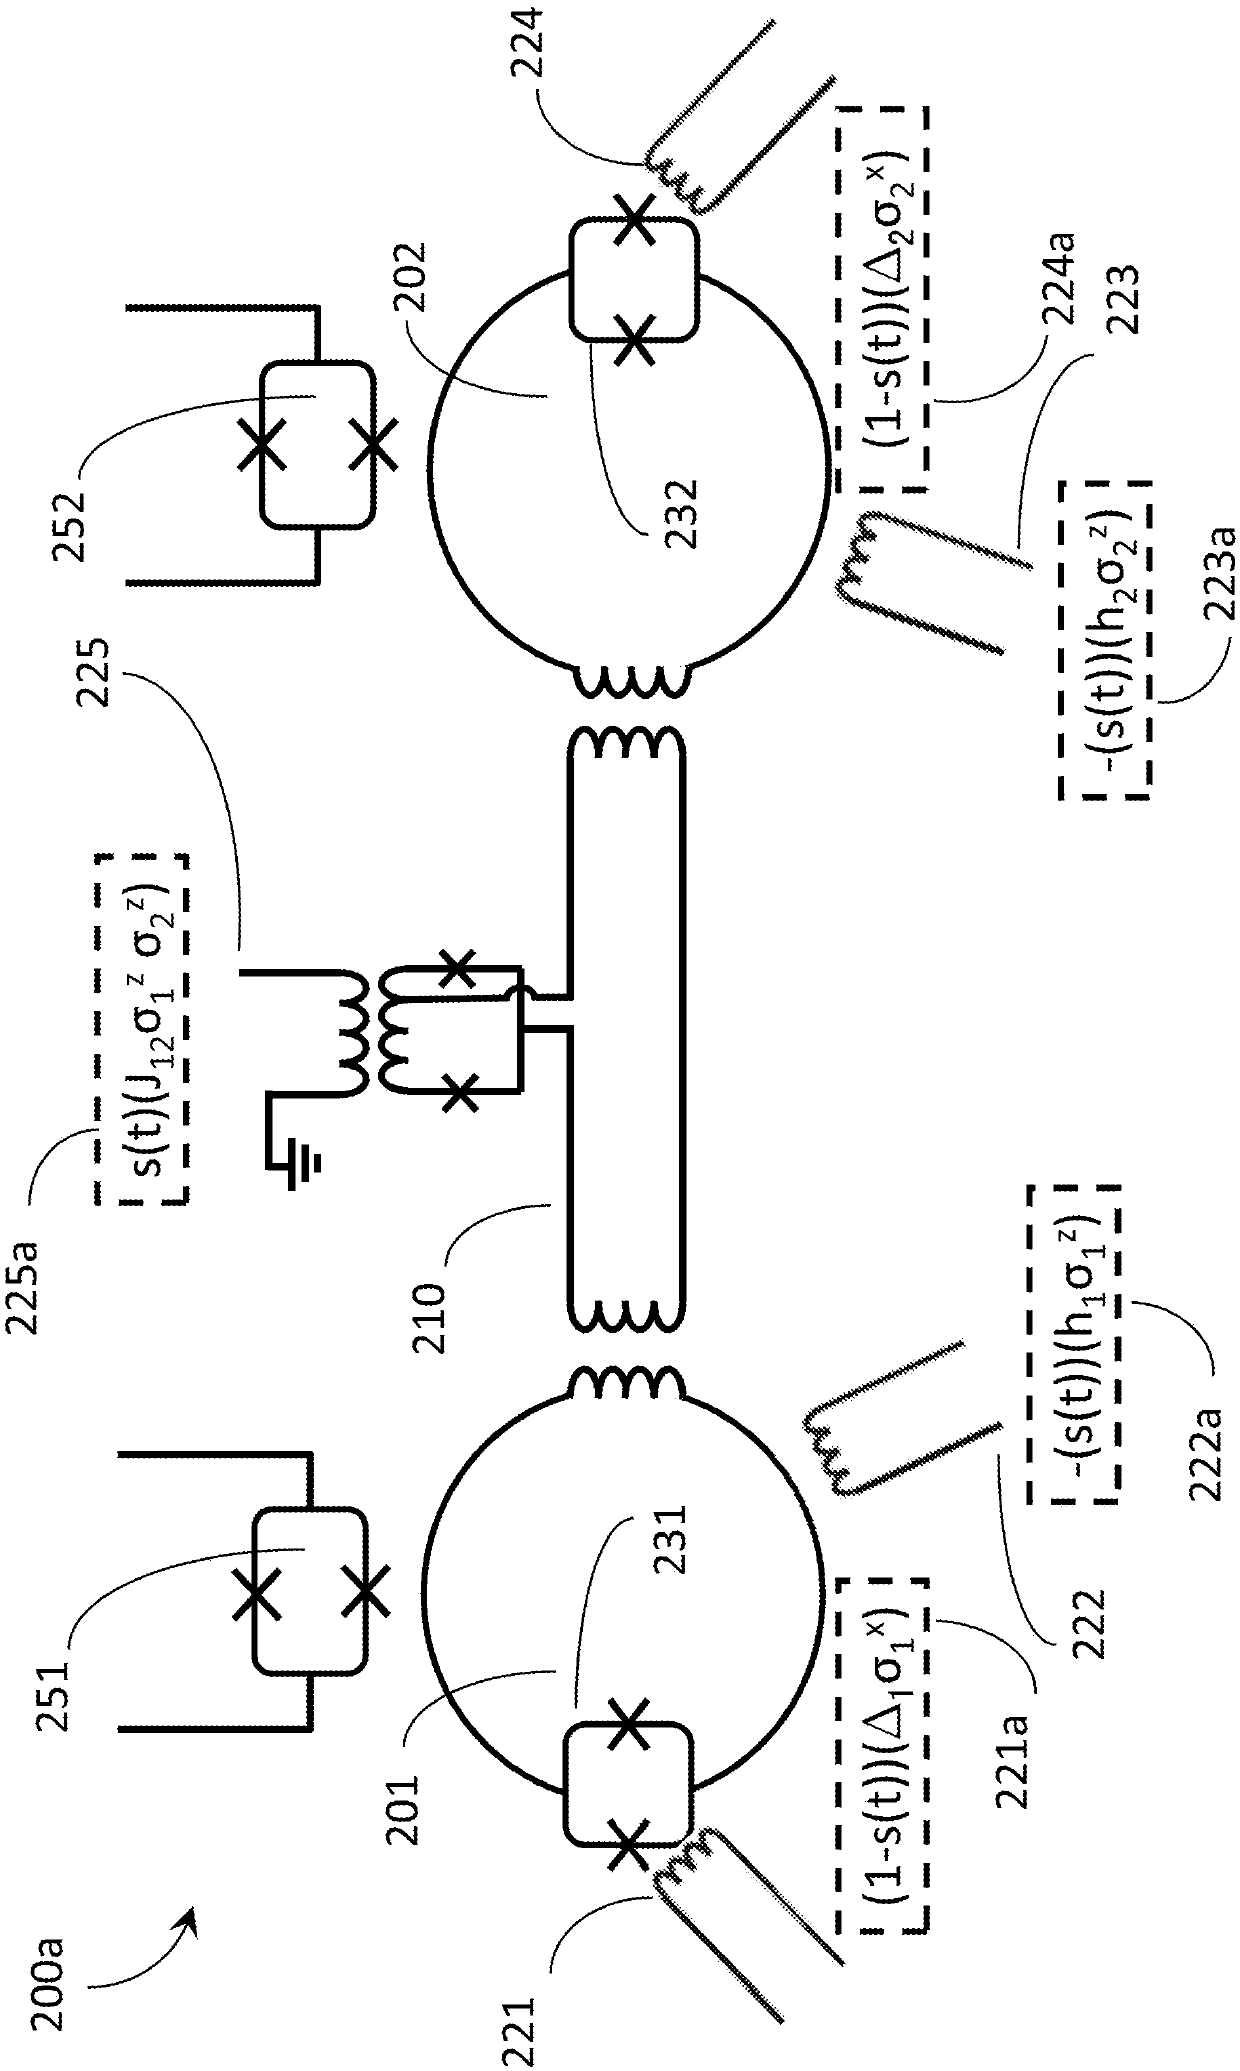 Systems and methods for creating and using higher degree interactions between quantum devices